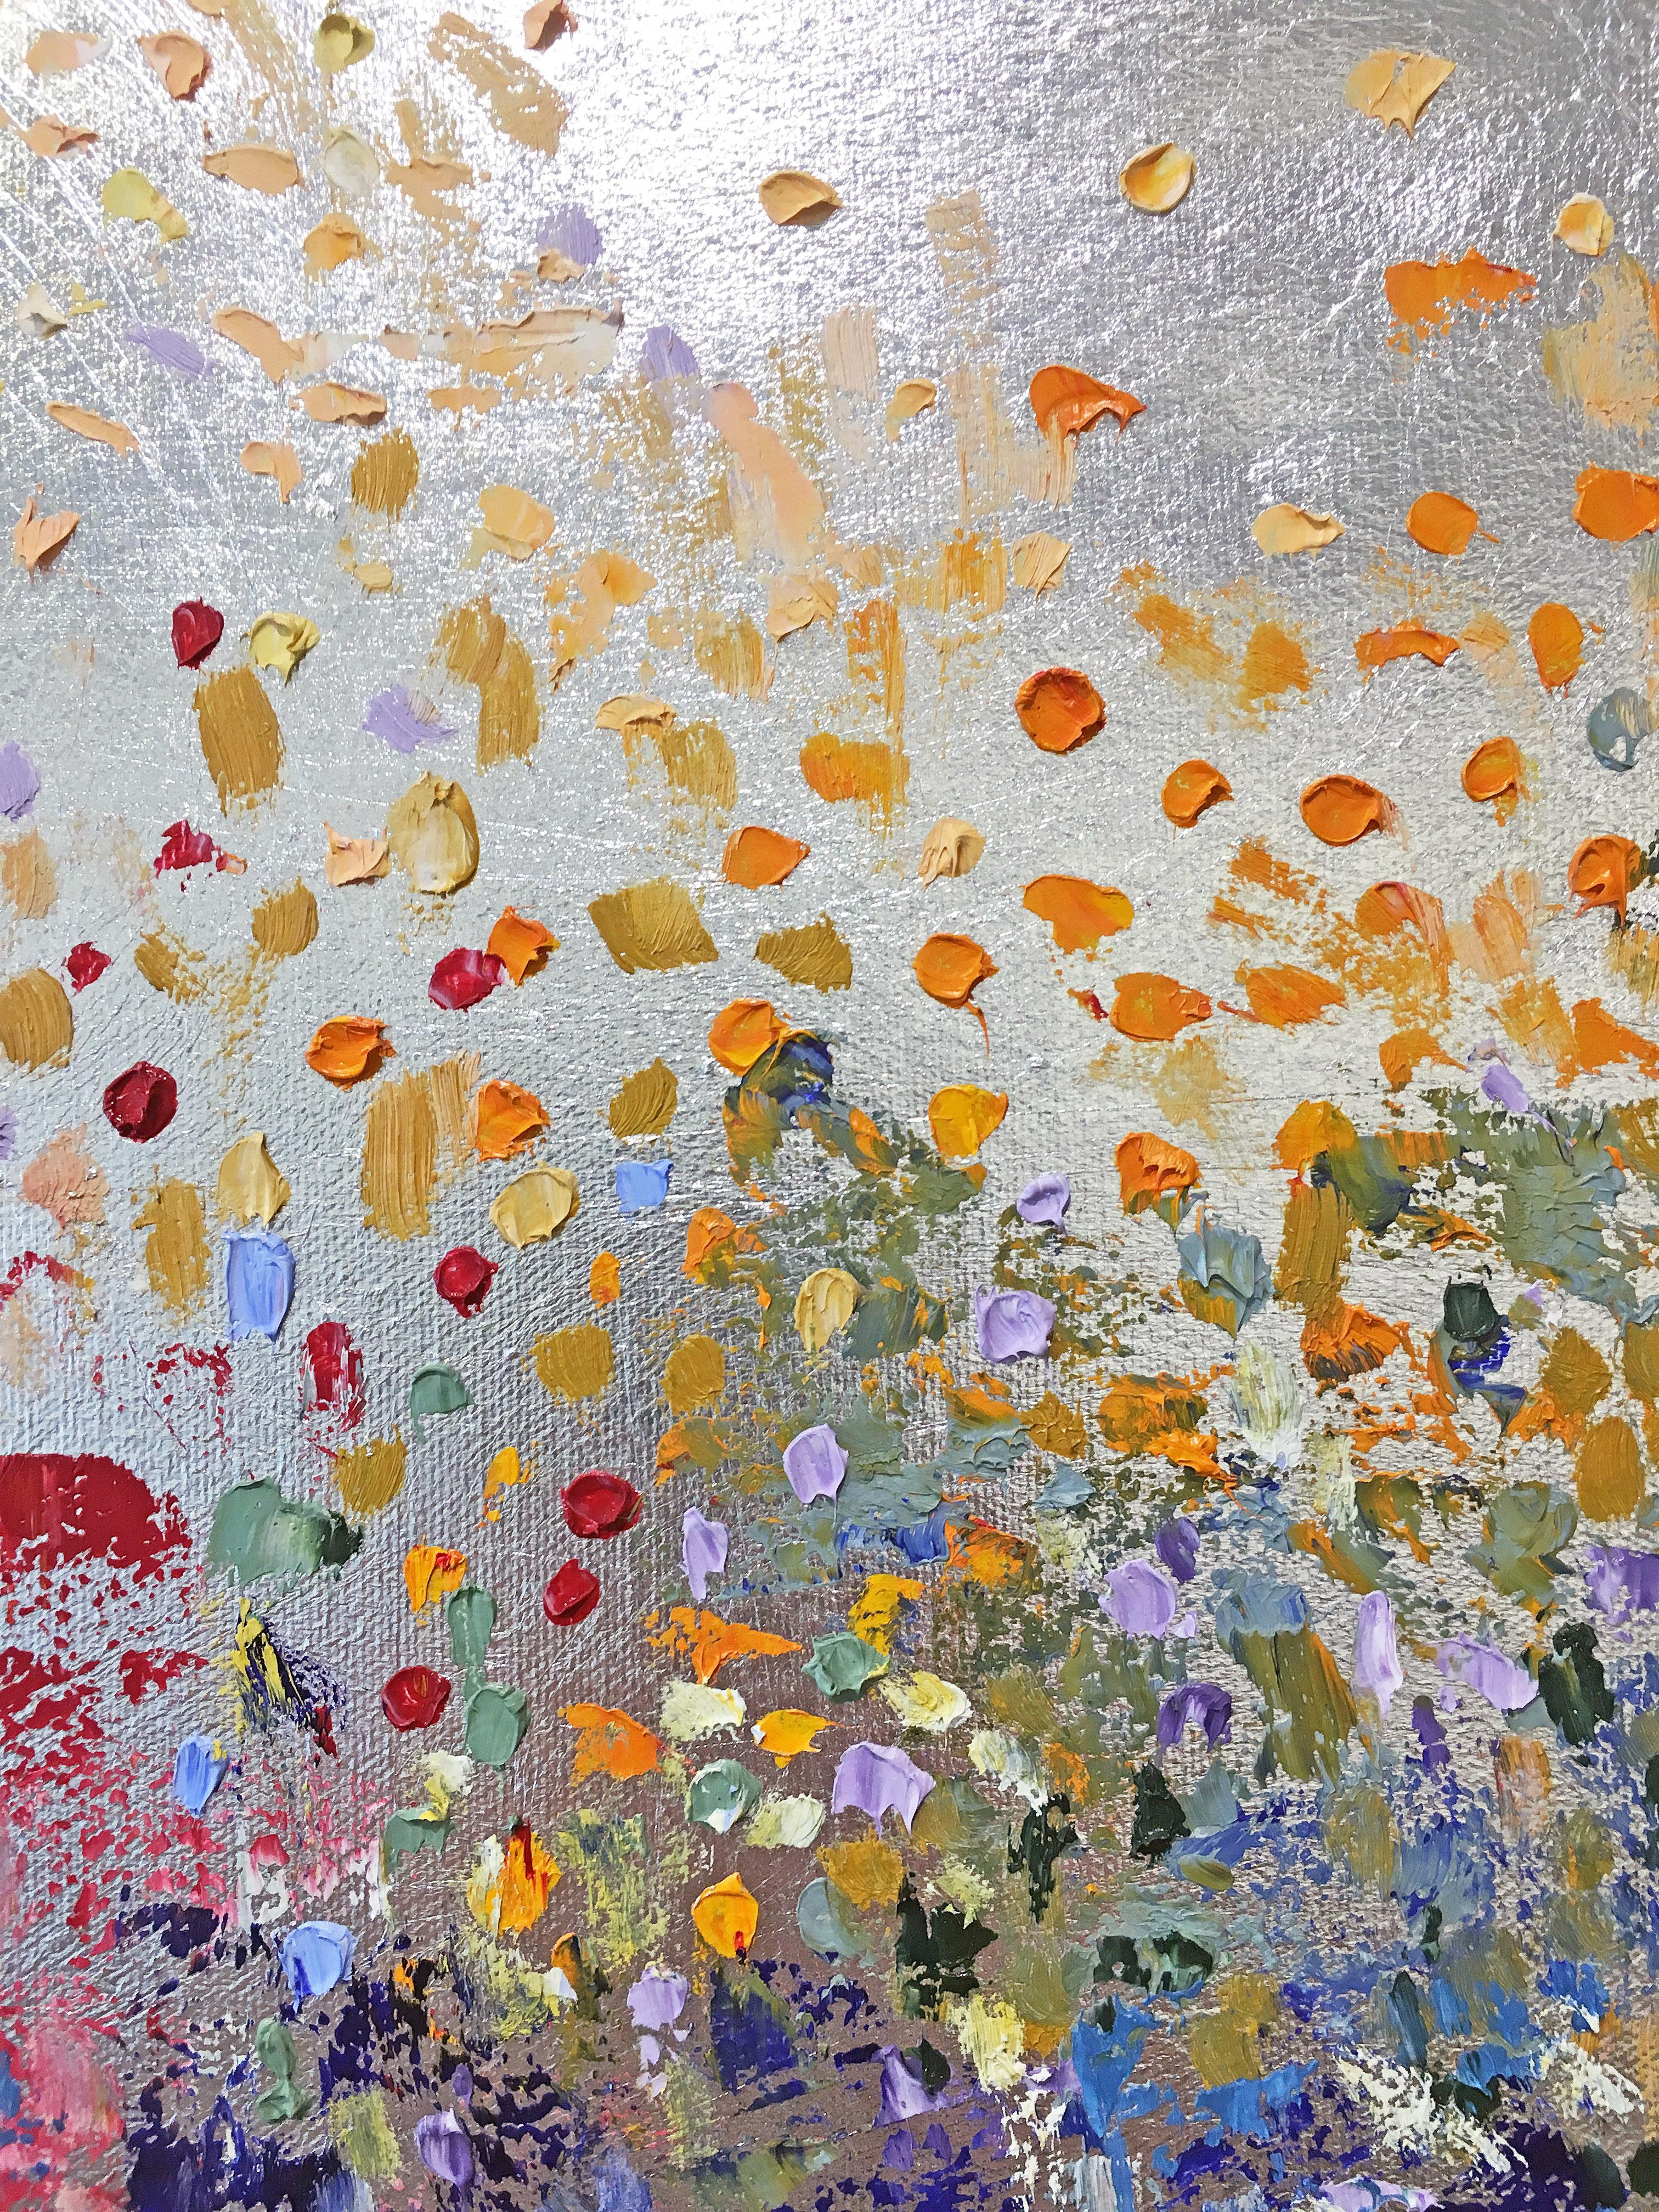 Sunshine - Abstract Expressionist Painting by Michelle Sakhai